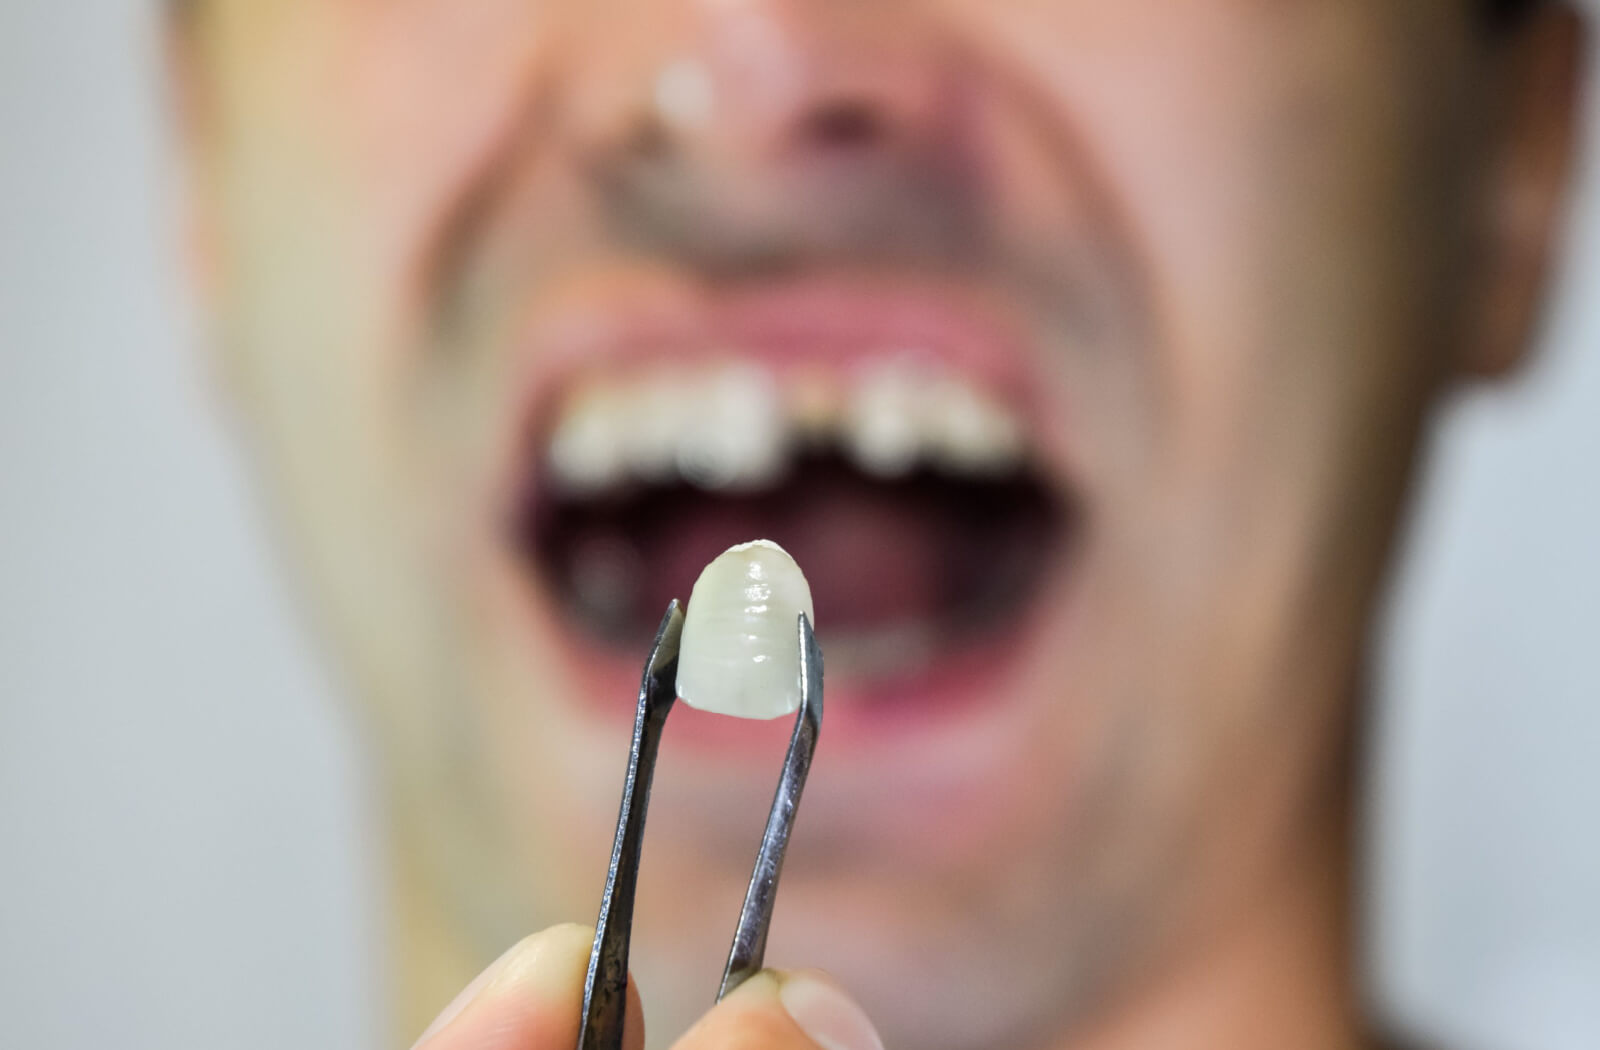 An up-close view of a dental crown intended for installation on a man's tooth.